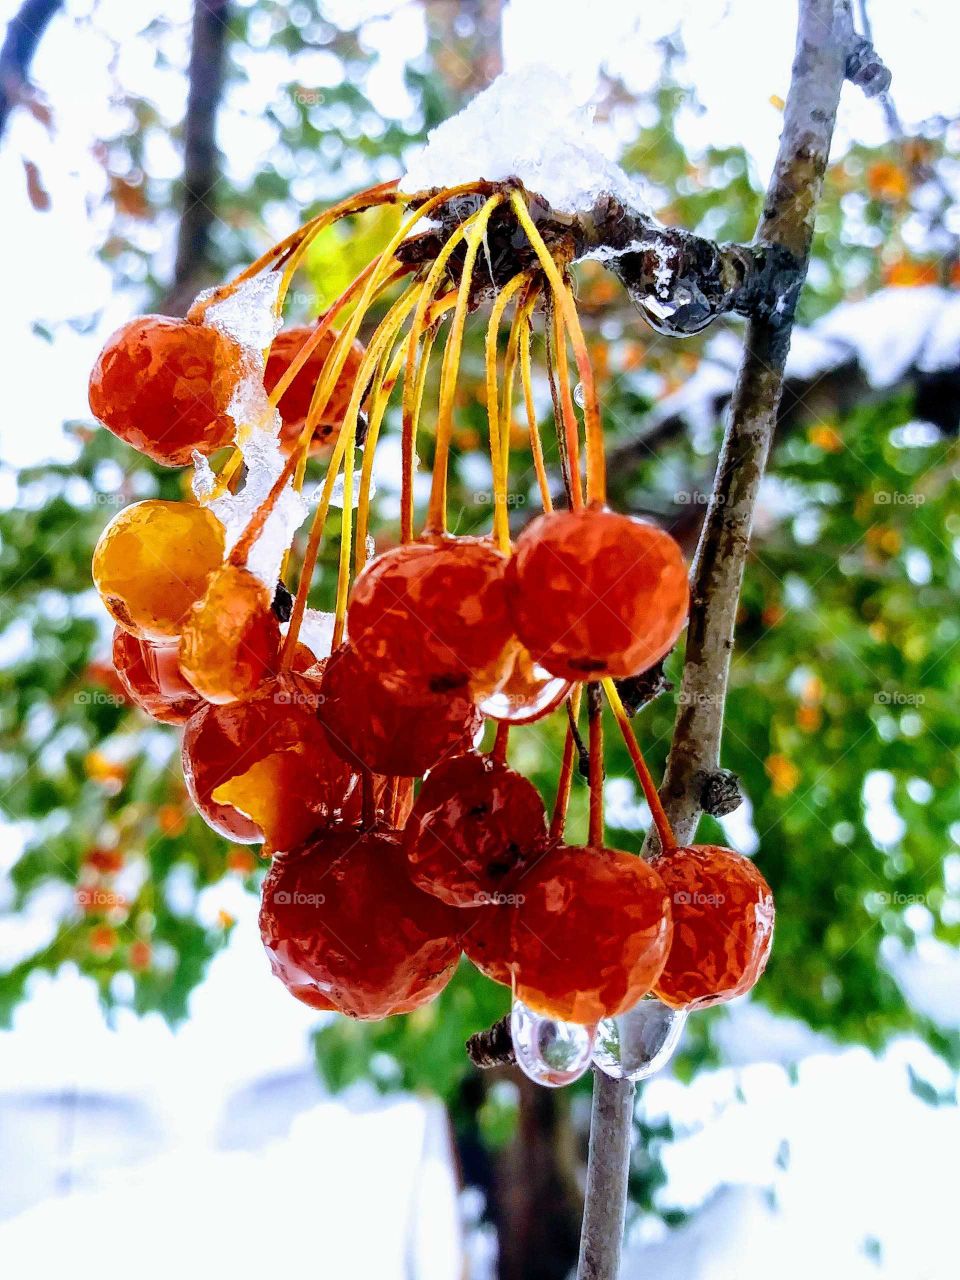 Chokeberries after the first snowfall